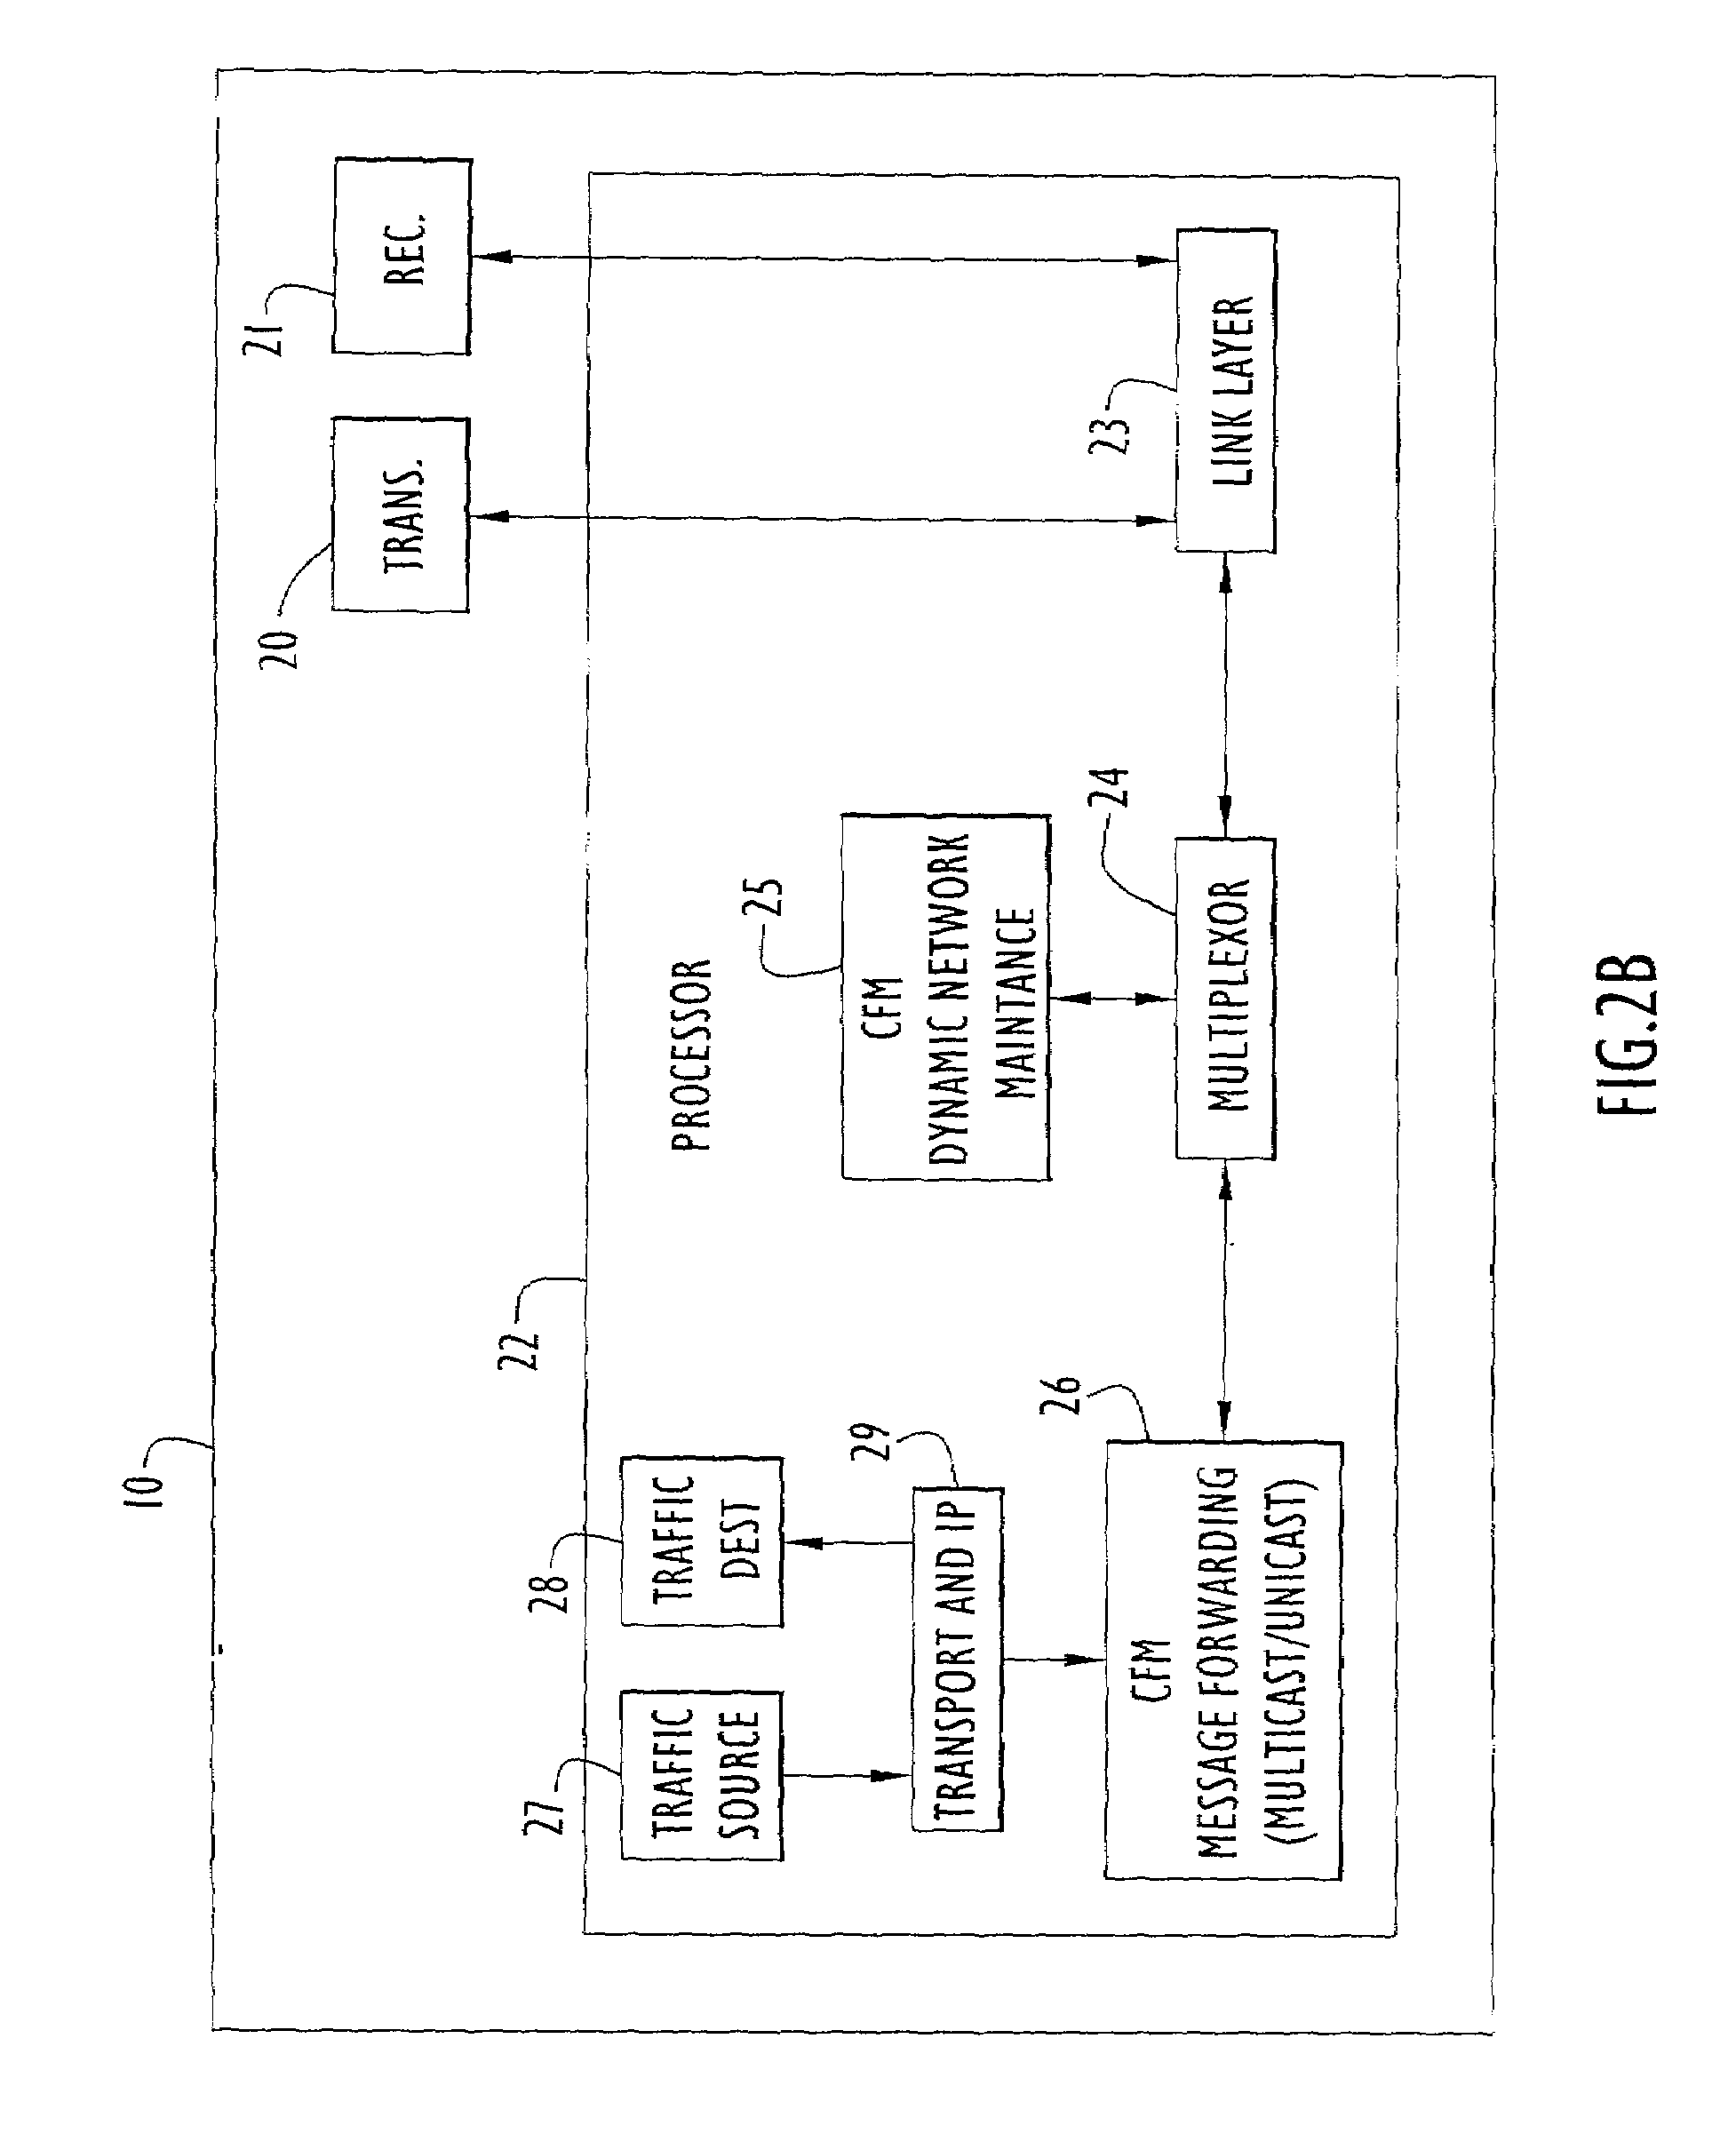 Method and apparatus for on demand multicast and unicast using controlled flood multicast communications